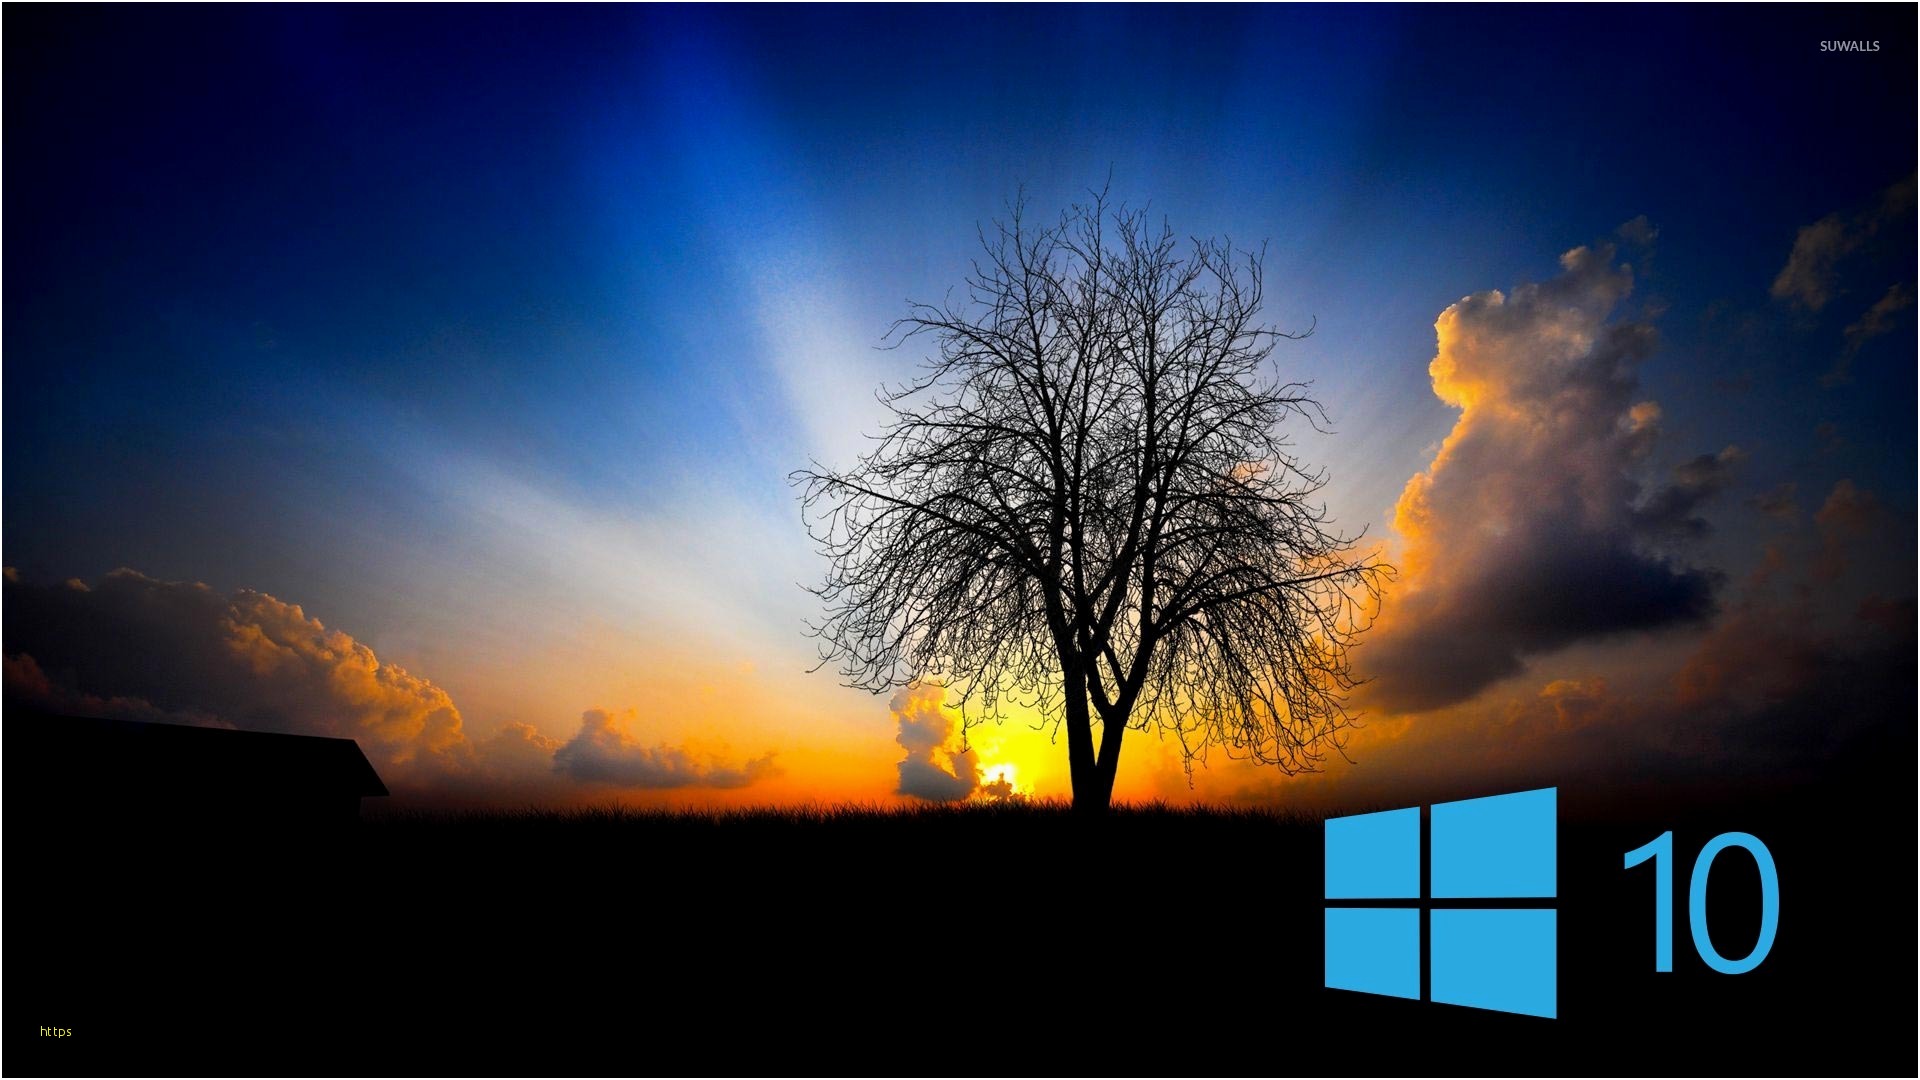 Windows 10 Wallpaper Awesome 400 Stunning Windows 10 - Desktop Background Wallpapers For Windows 10 , HD Wallpaper & Backgrounds